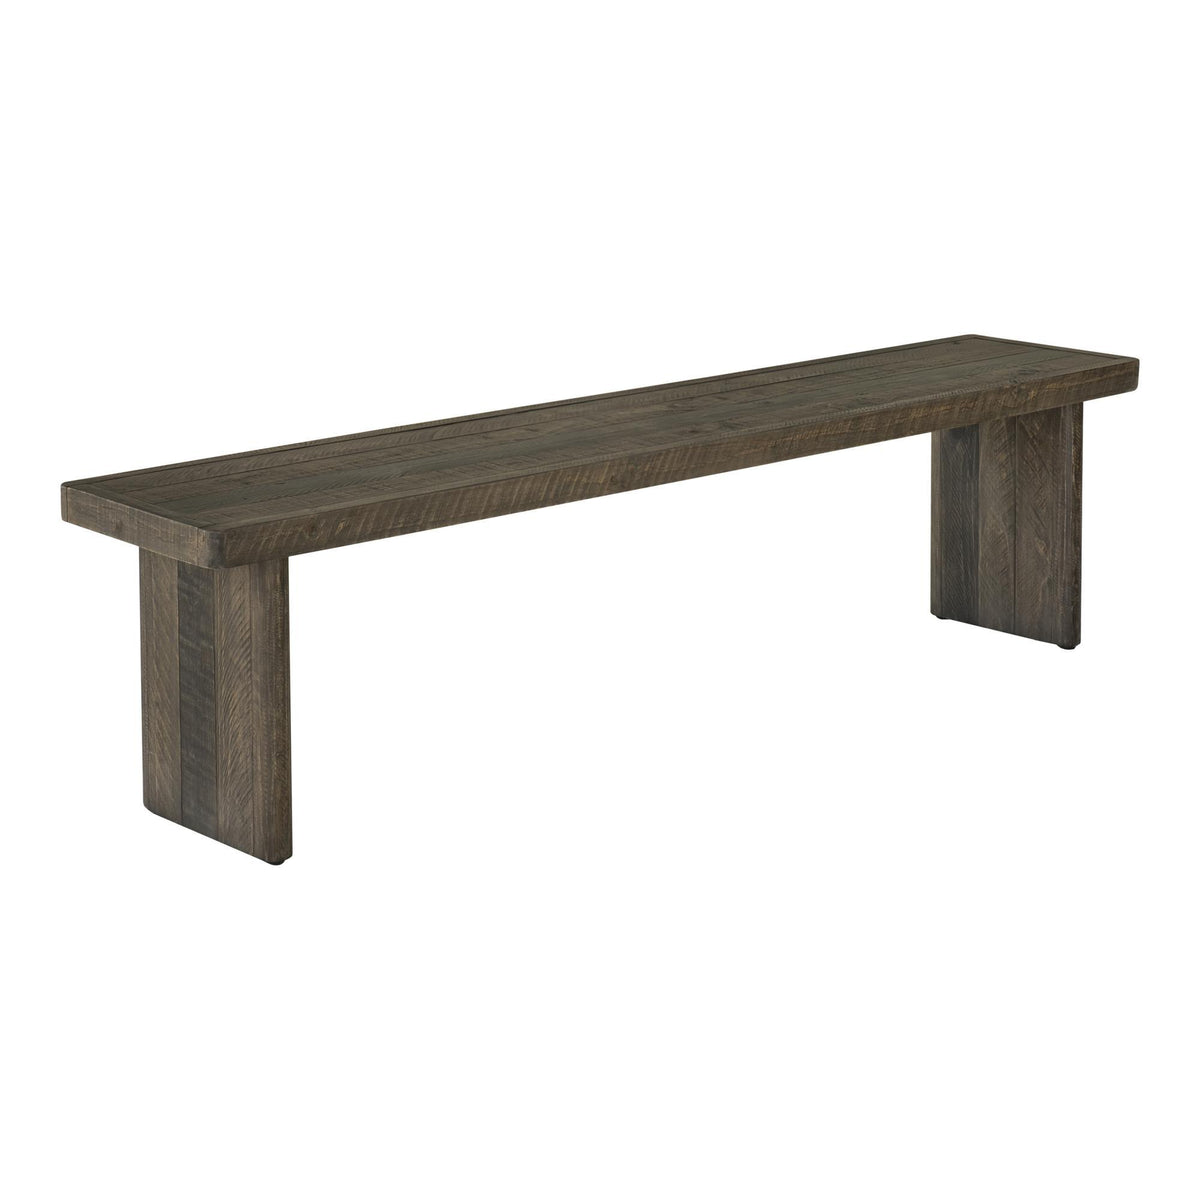 Moe's Home Collection Monterey Bench - FR-1028-29